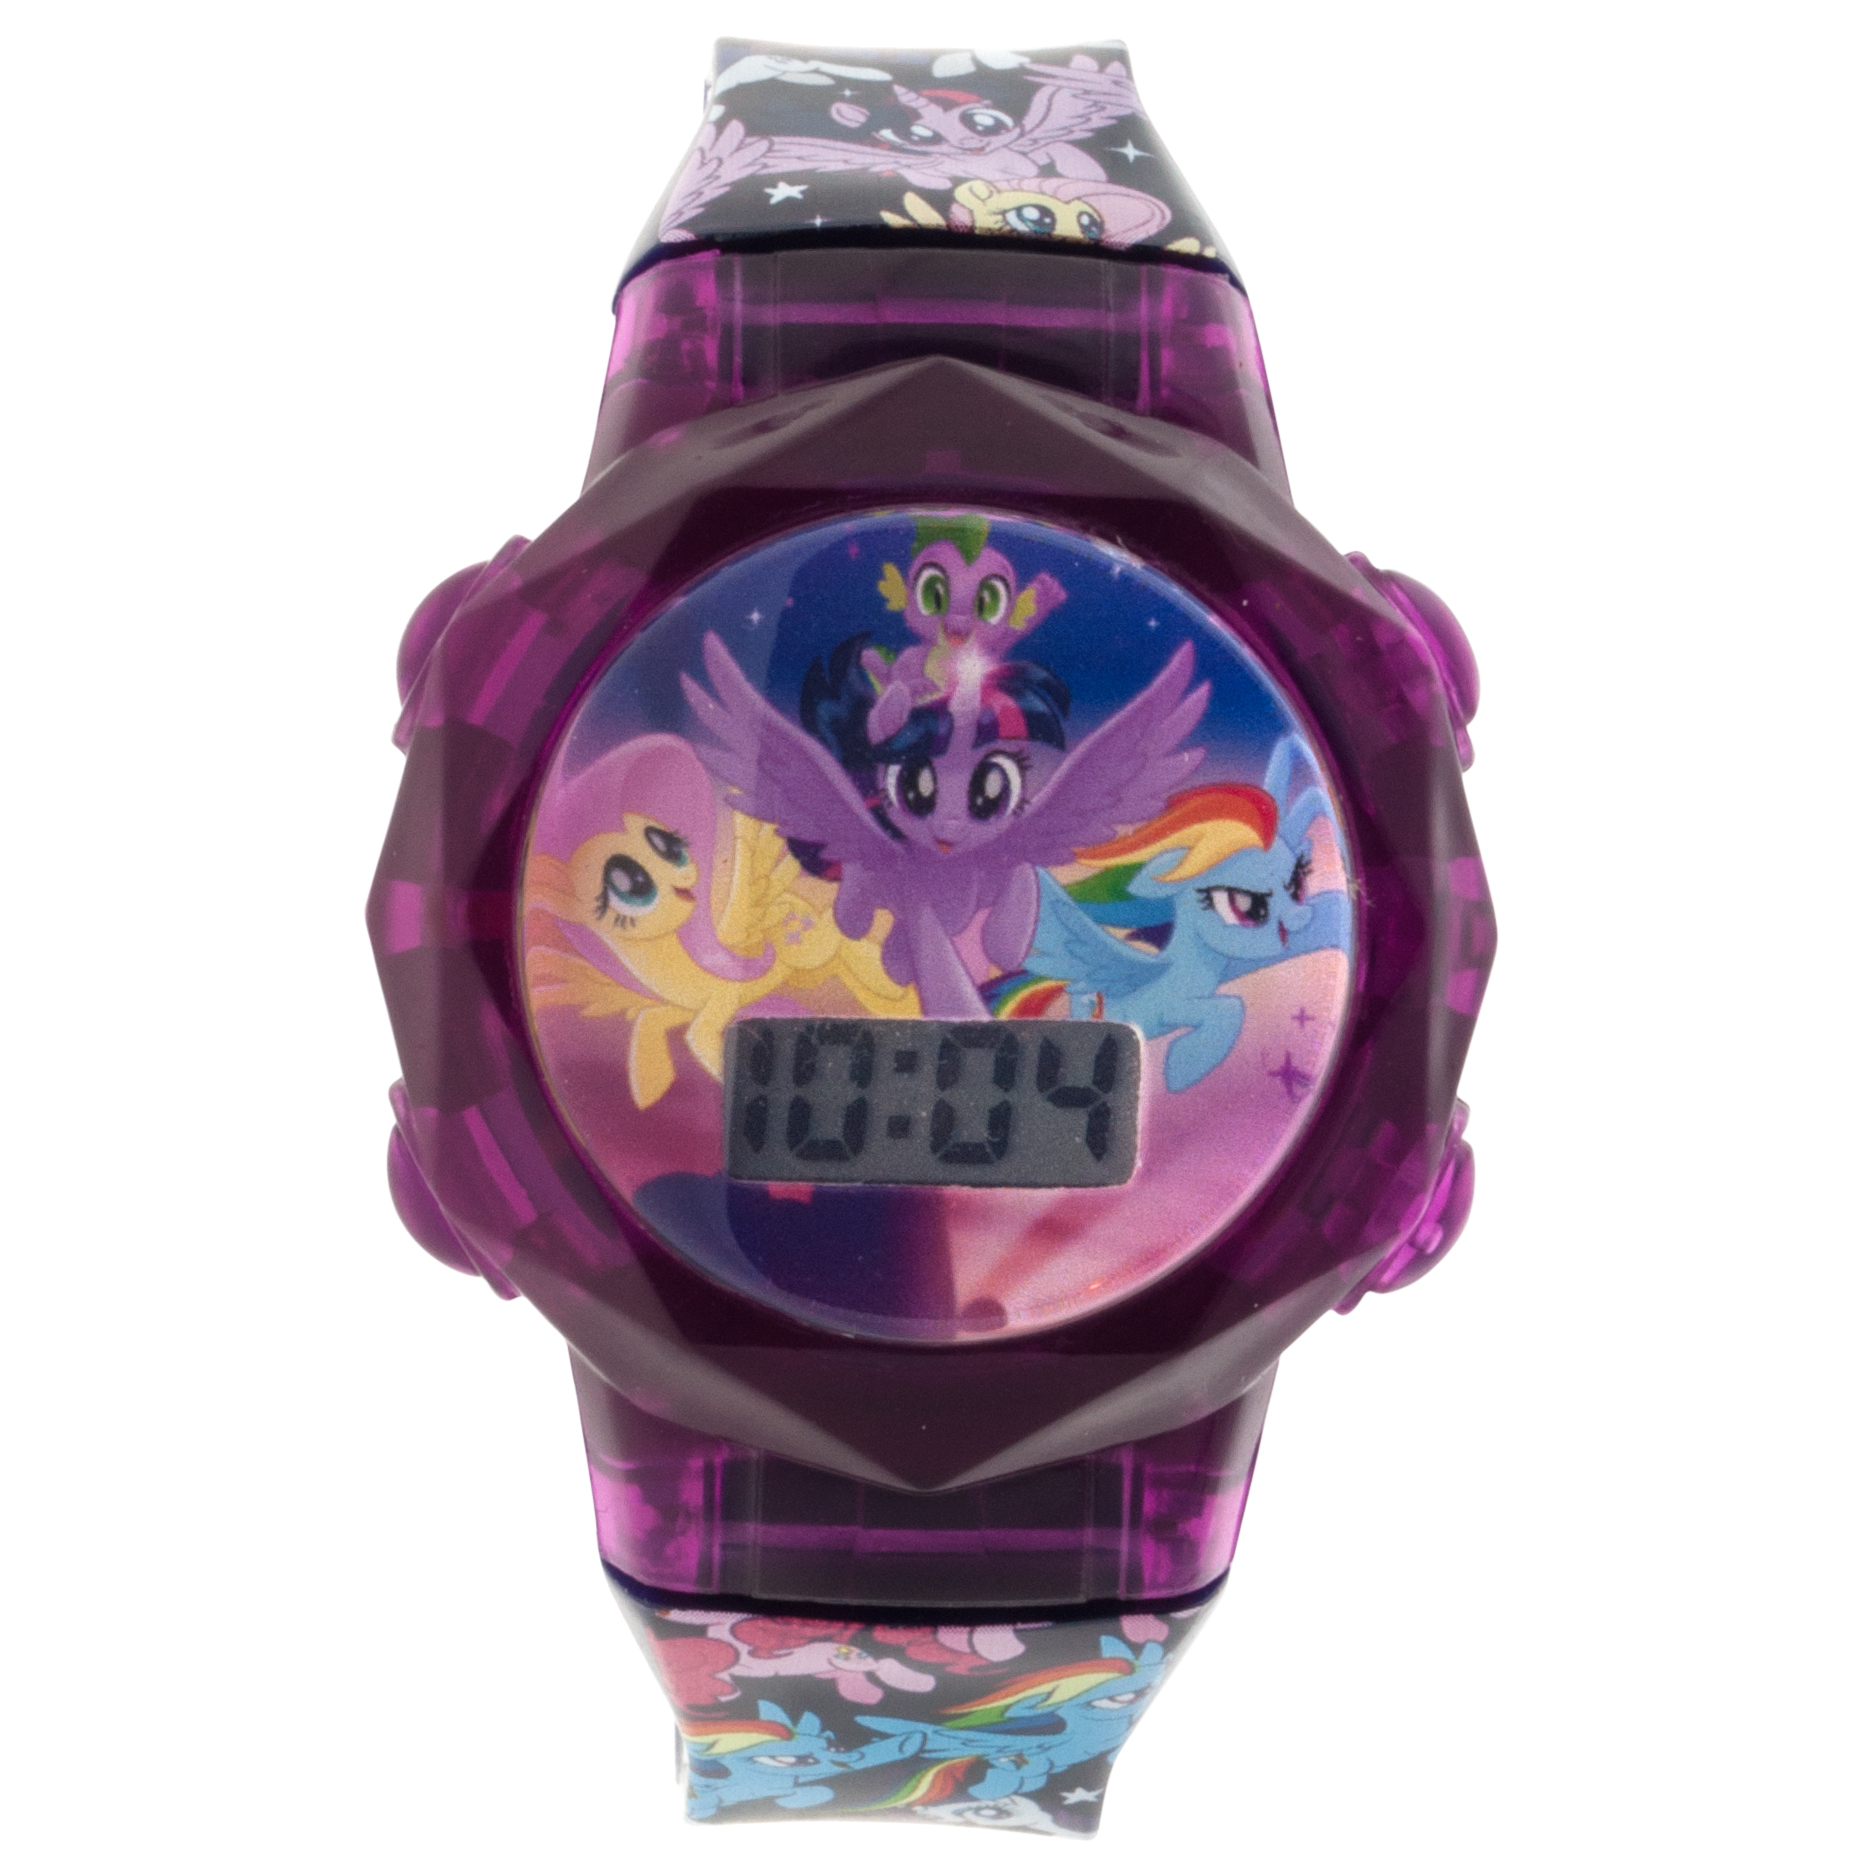 Hasbro Kid's My Little Pony Light Up LCD Watch With Coin Purse